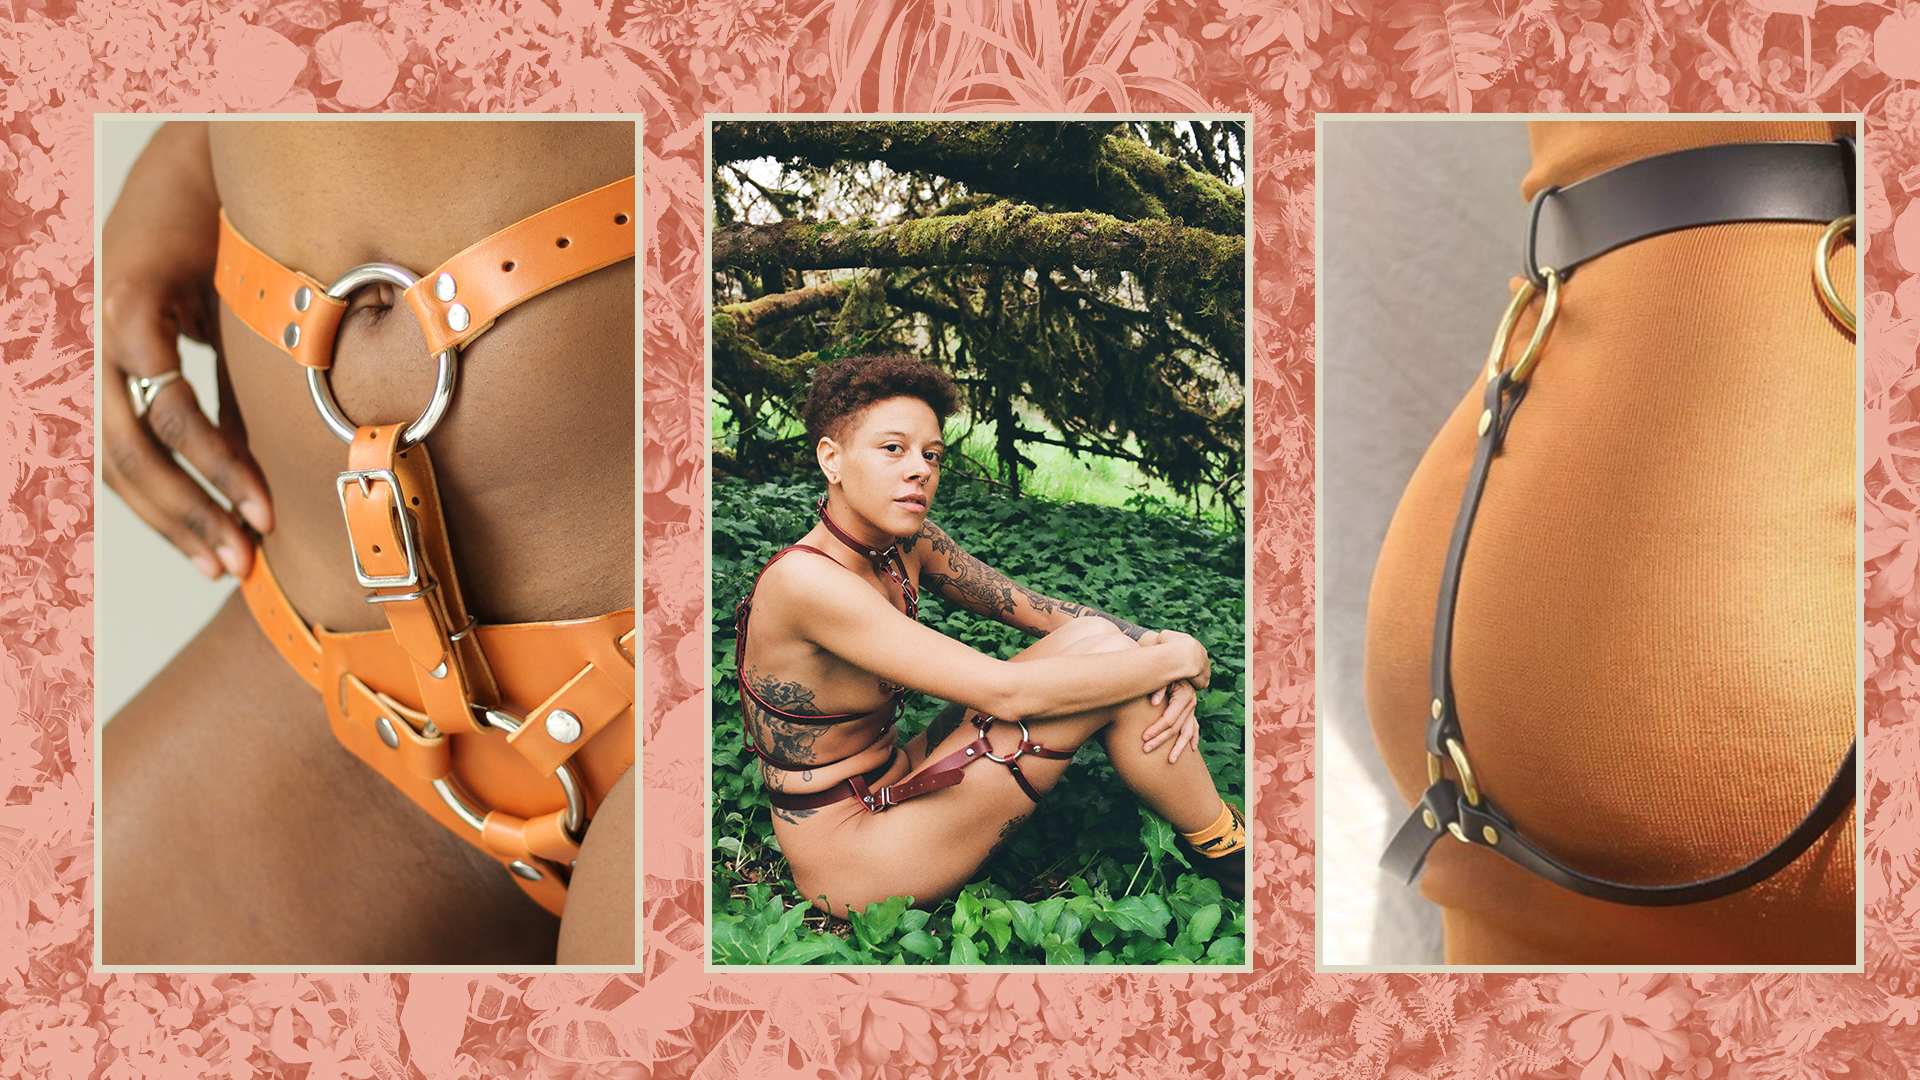 Strap-Ons Are Art for This Femme-Friendly DIY Leather Company image